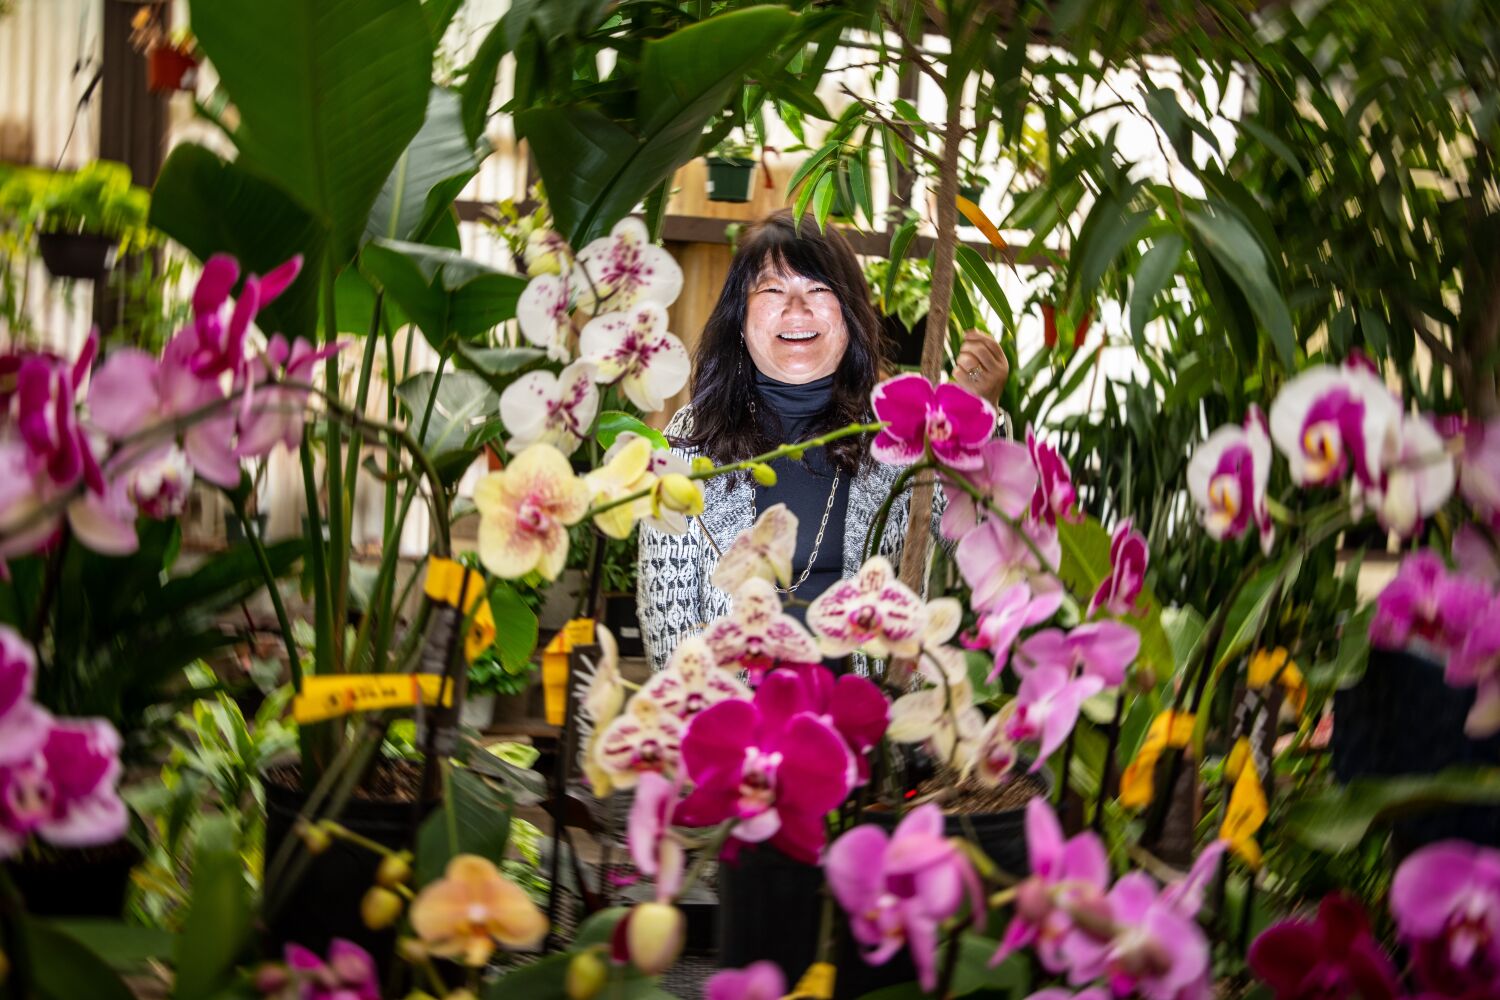 After 100 years, San Gabriel Nursery and Florist continues to bloom